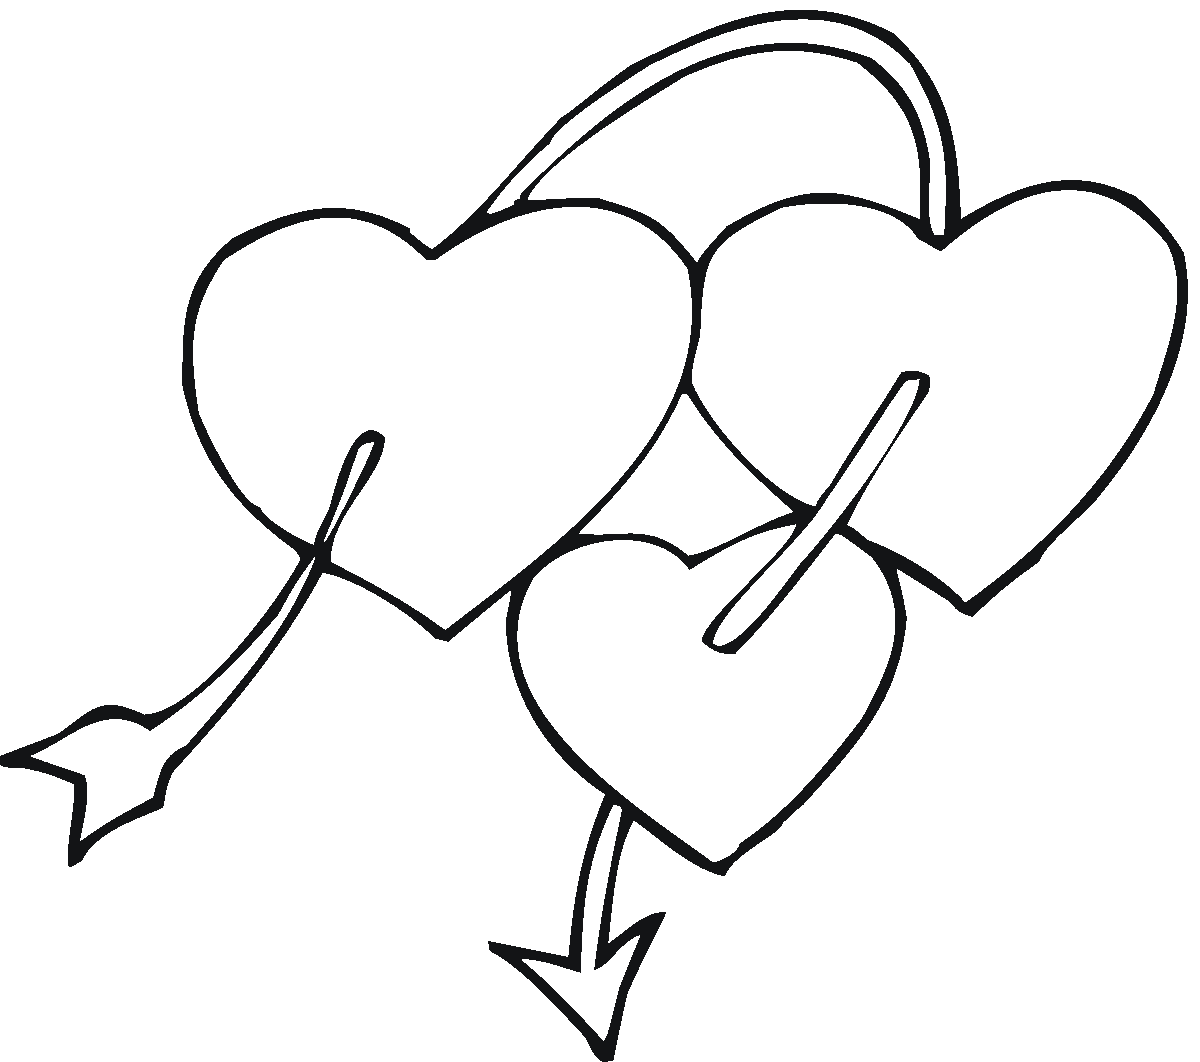 xp100 11 02 coloring pages - photo #19